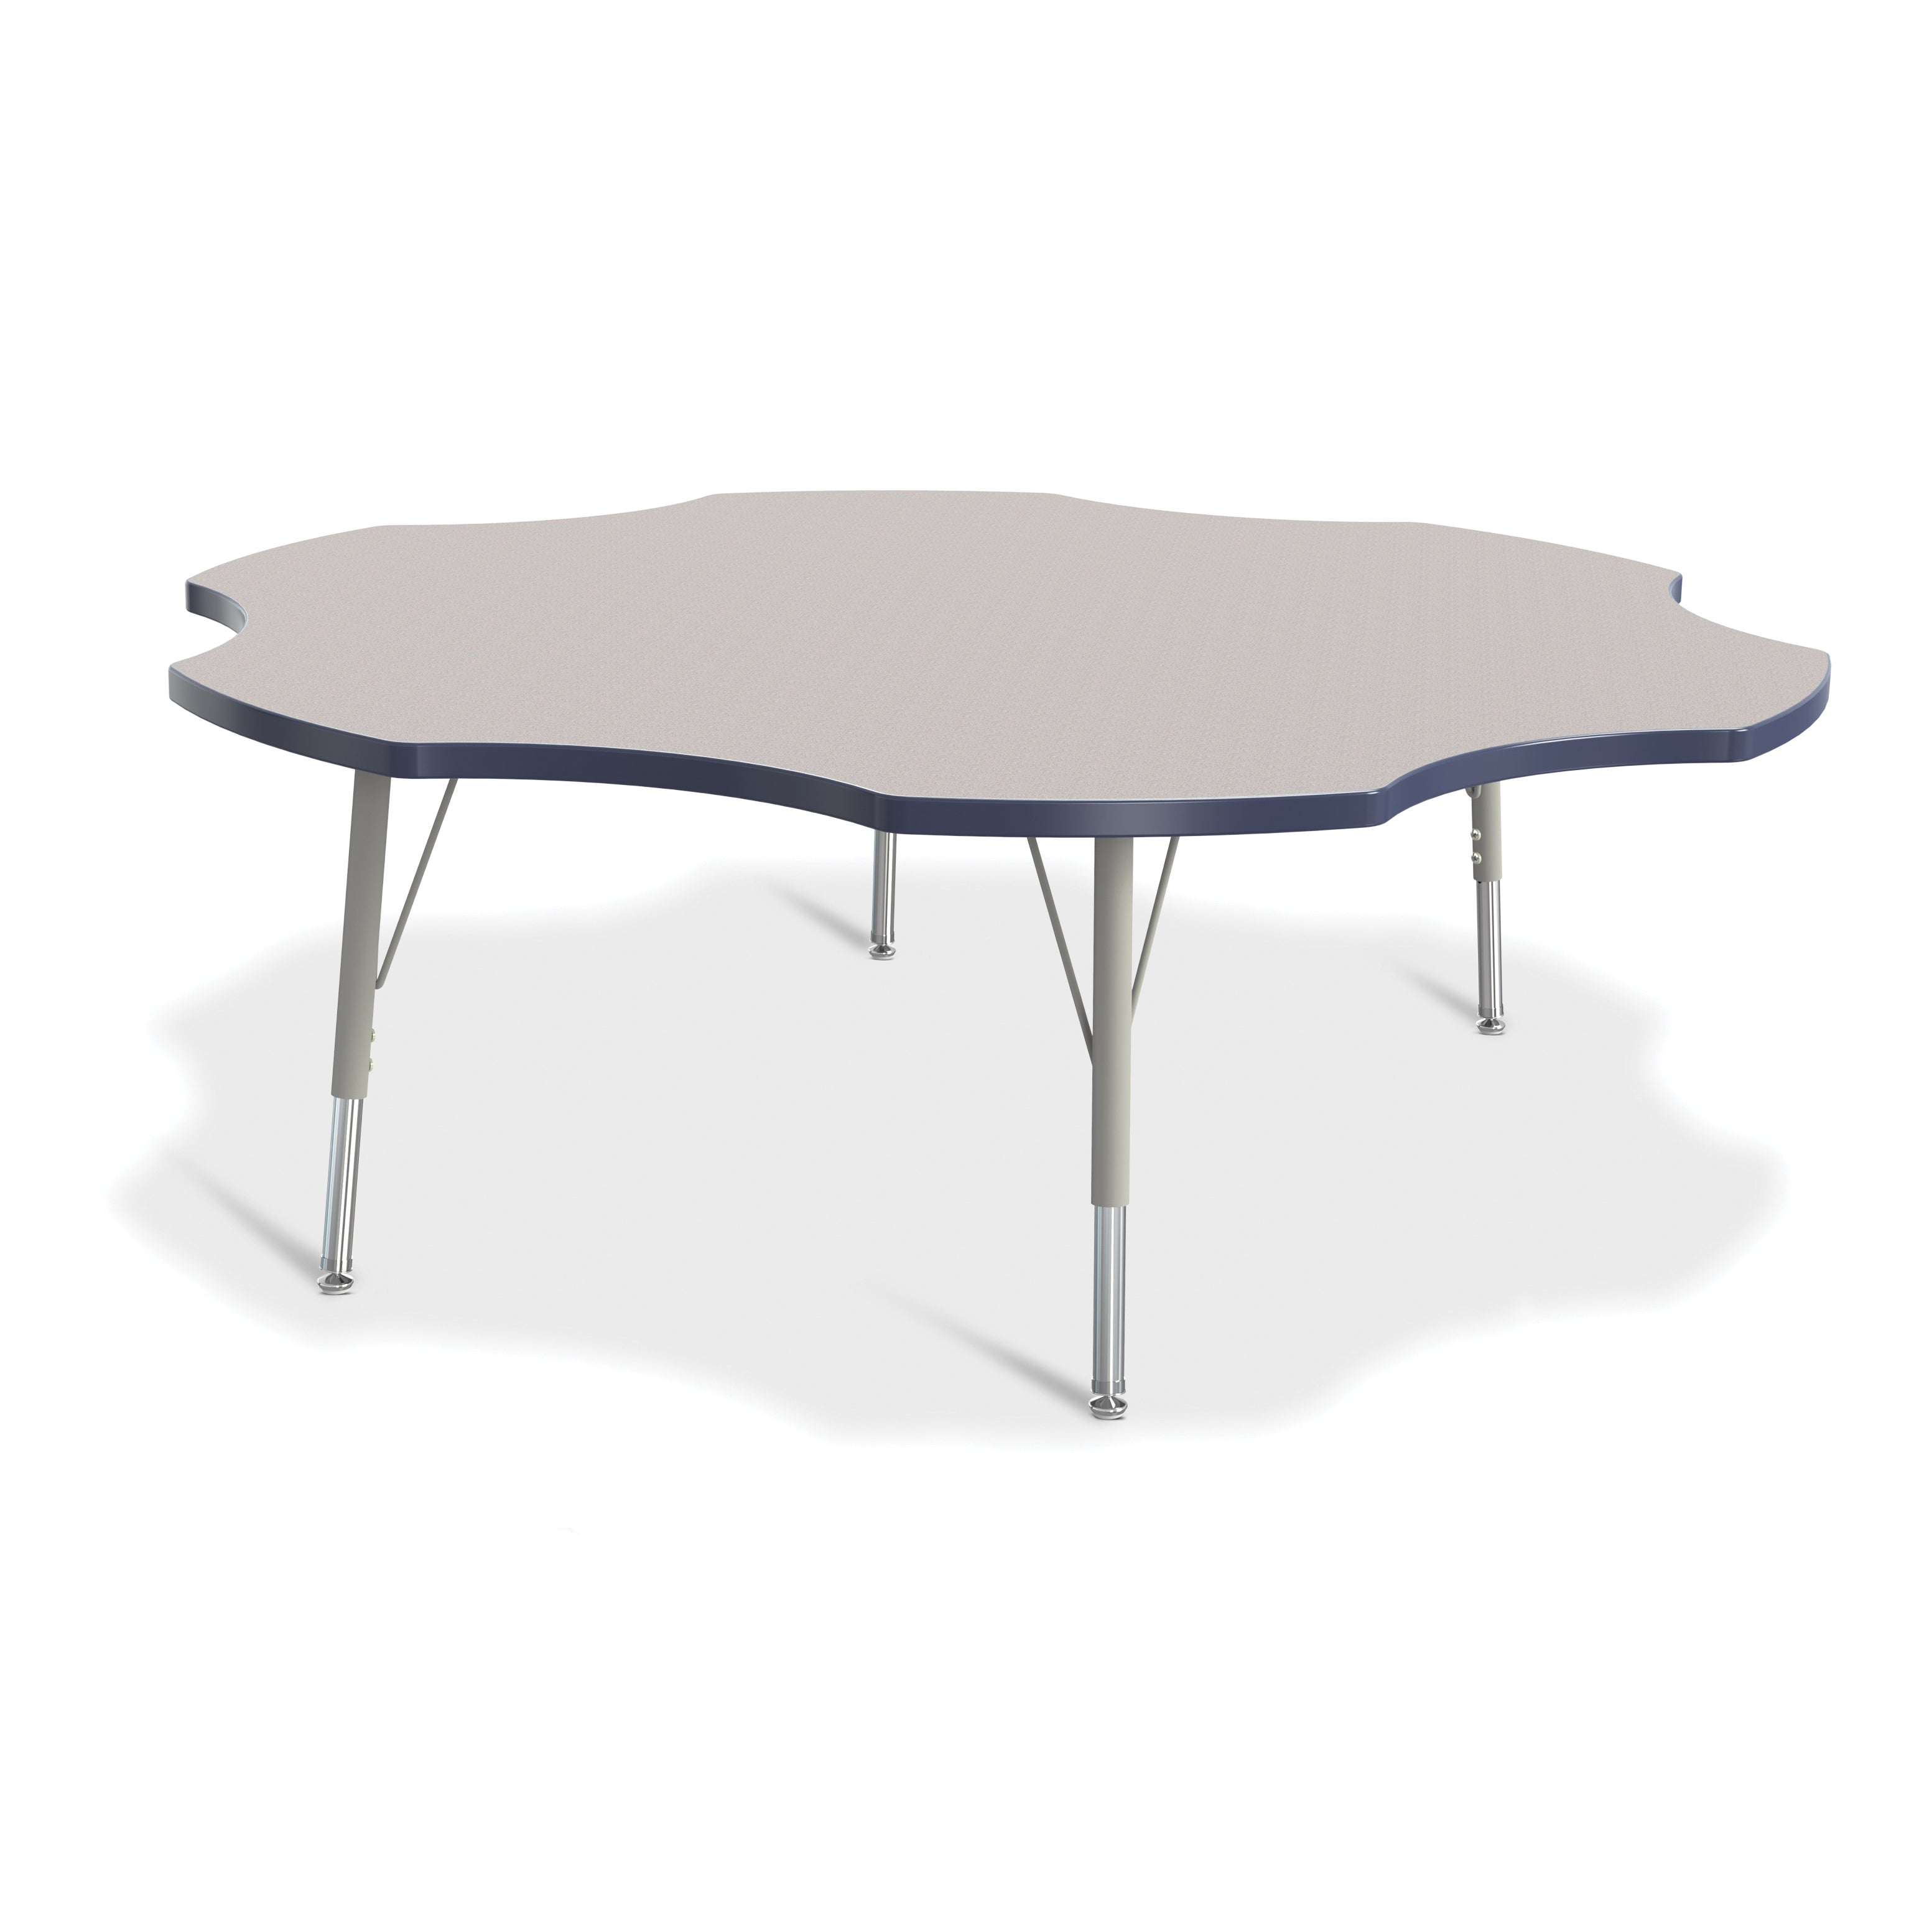 6458JCE112, Berries Six Leaf Activity Table - 60", E-height - Freckled Gray/Navy/Gray